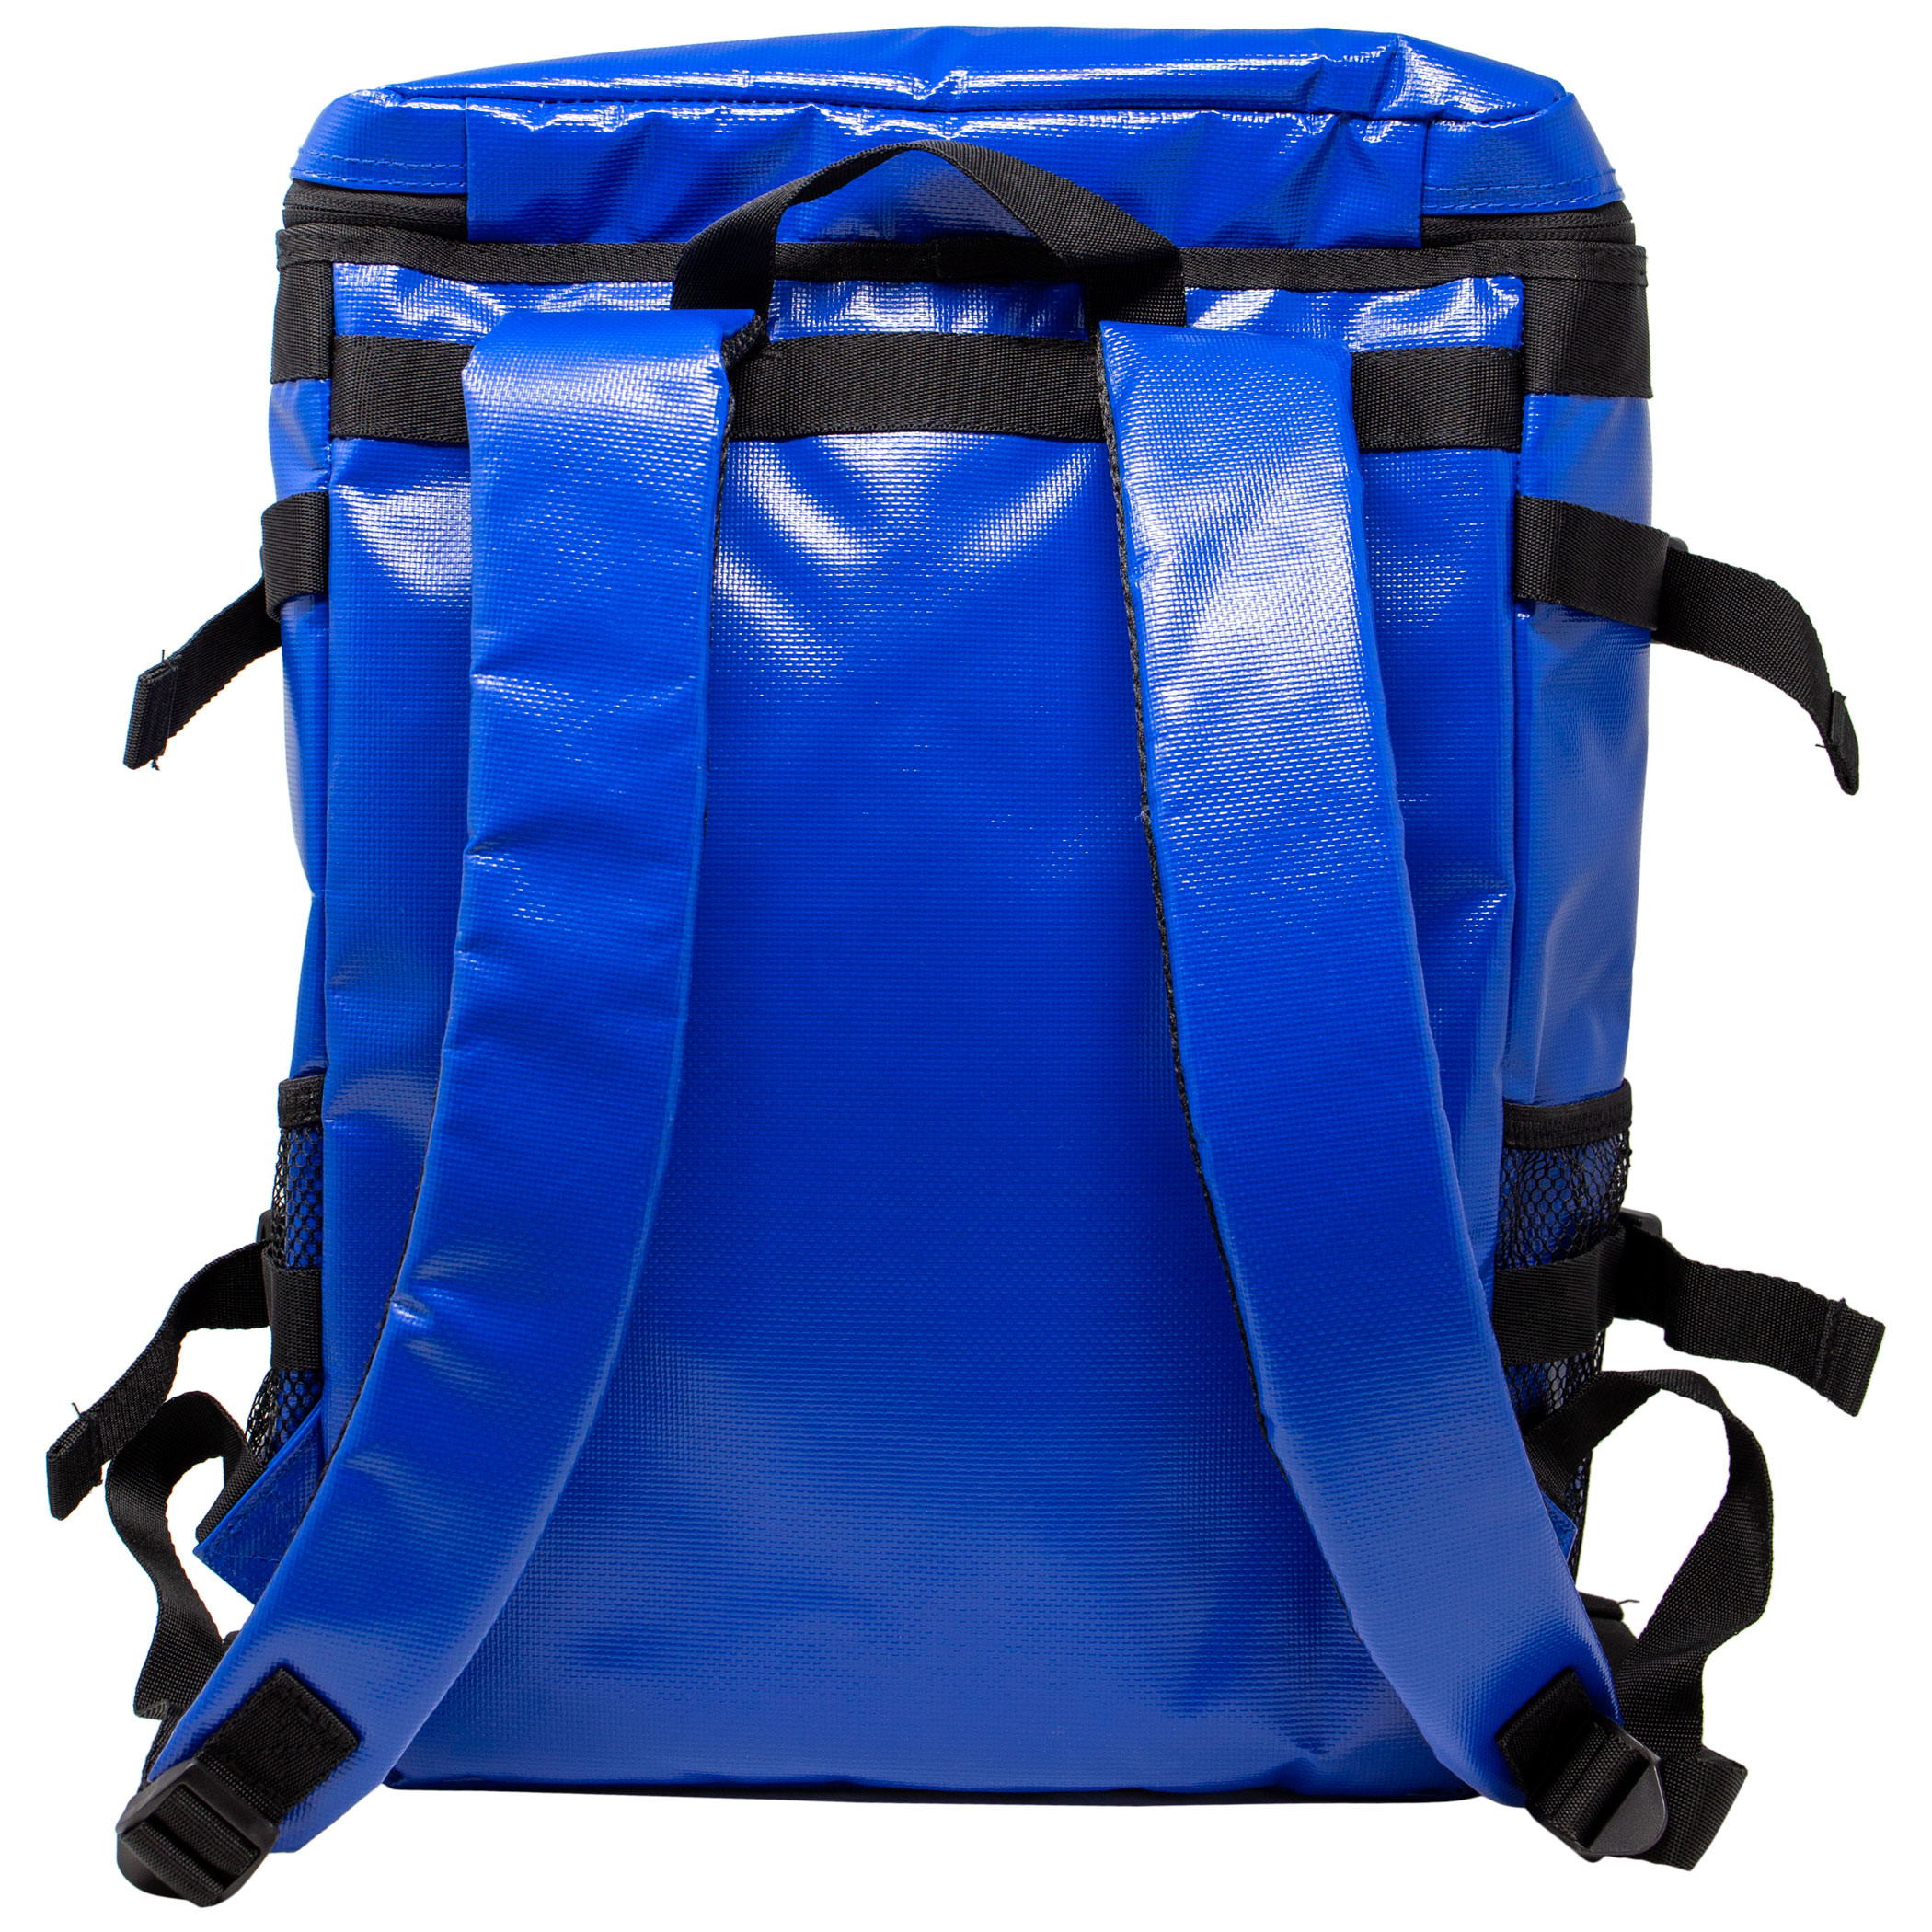 Corona Extra Label Backpack Cooler